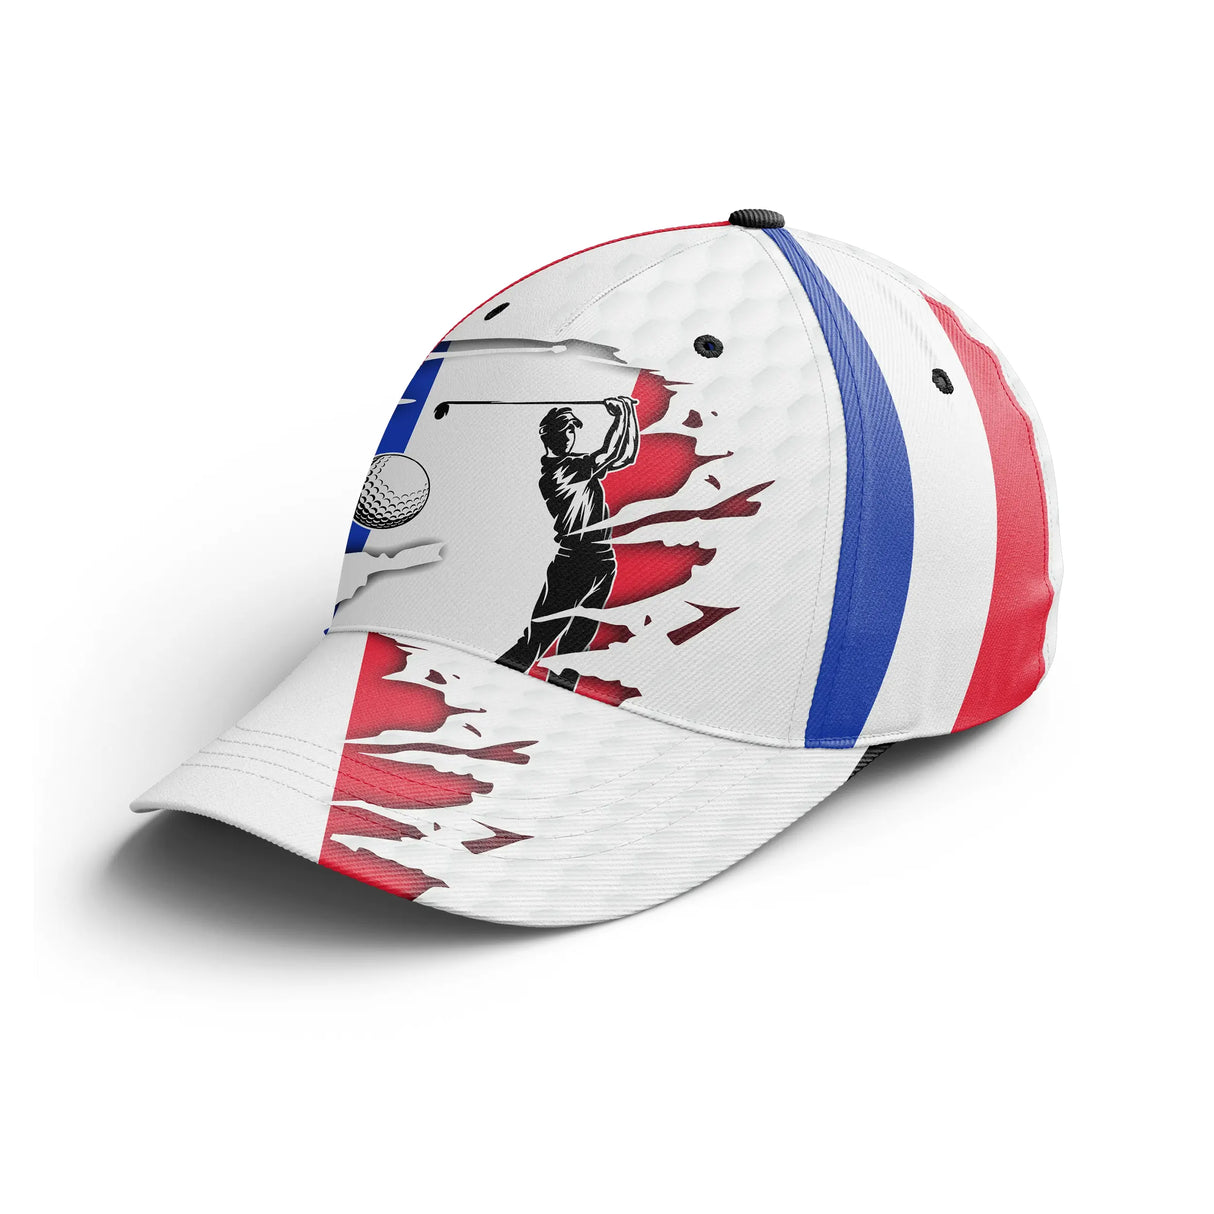 Chiptshirts - Performance Golf Cap, Golf Ball Designs, France Flag, Ideal Gift for Golf Fans - CTS26052237